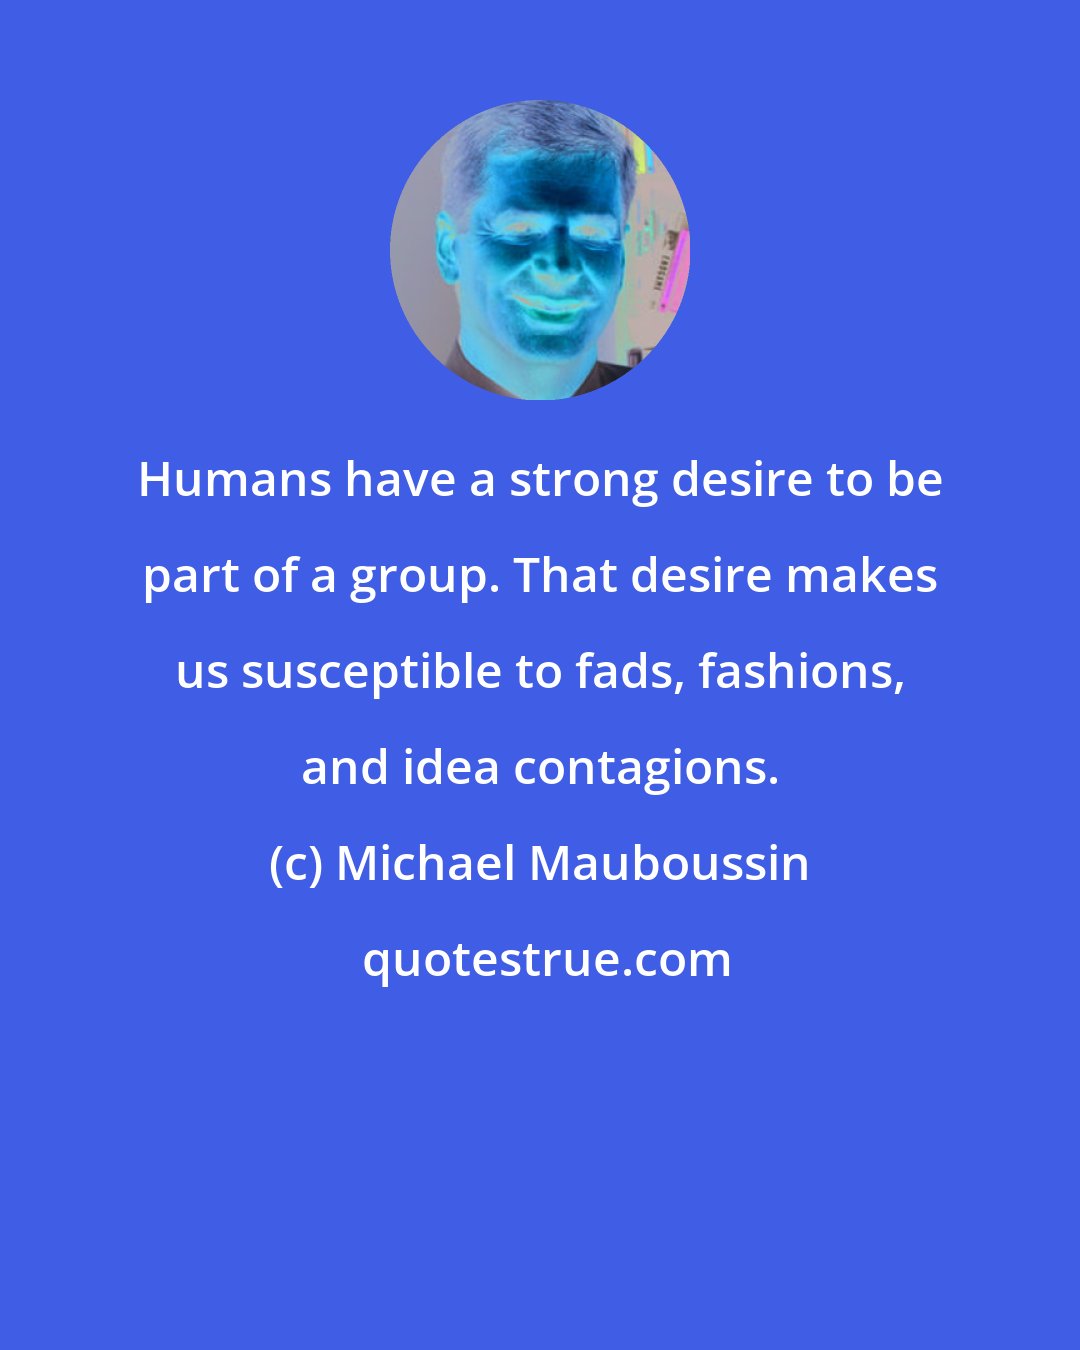 Michael Mauboussin: Humans have a strong desire to be part of a group. That desire makes us susceptible to fads, fashions, and idea contagions.